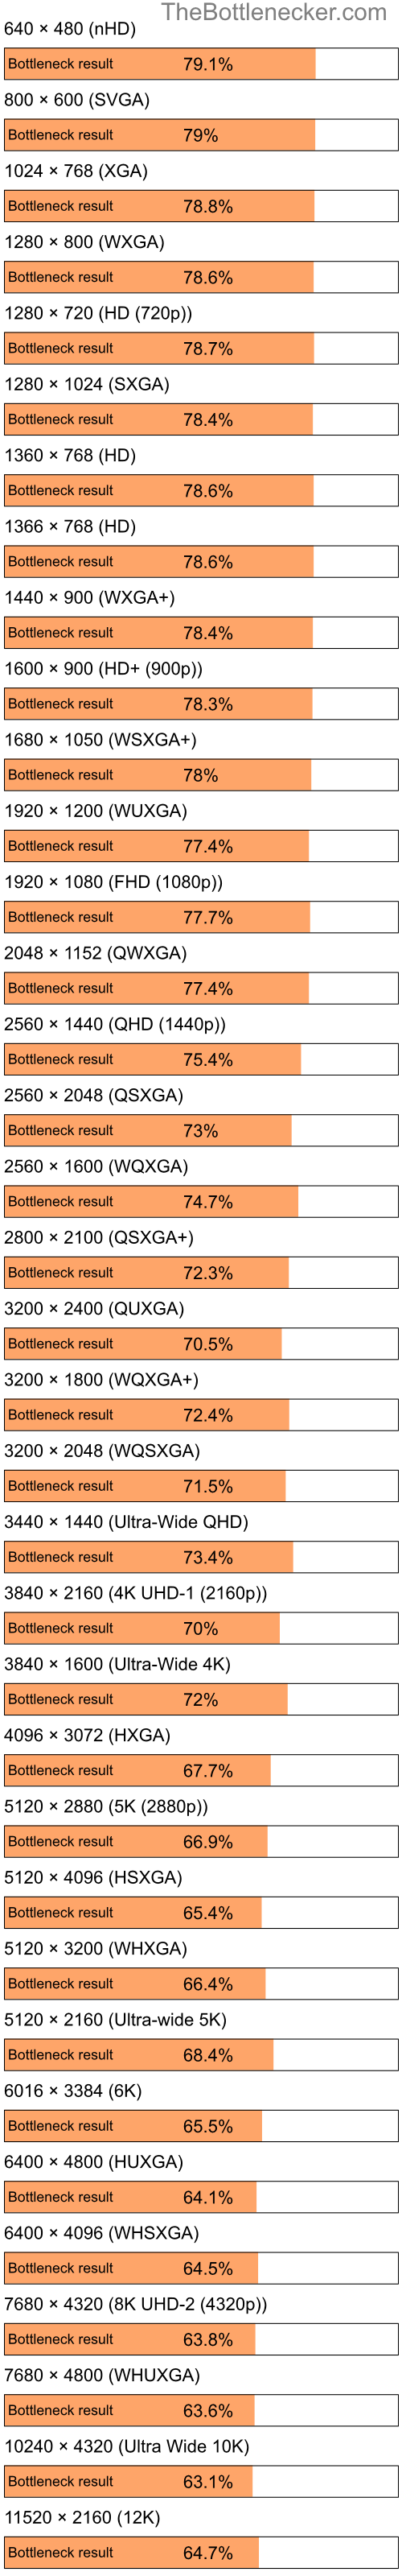 Bottleneck results by resolution for AMD Sempron 3400+ and NVIDIA GeForce RTX 2060 in Graphic Card Intense Tasks